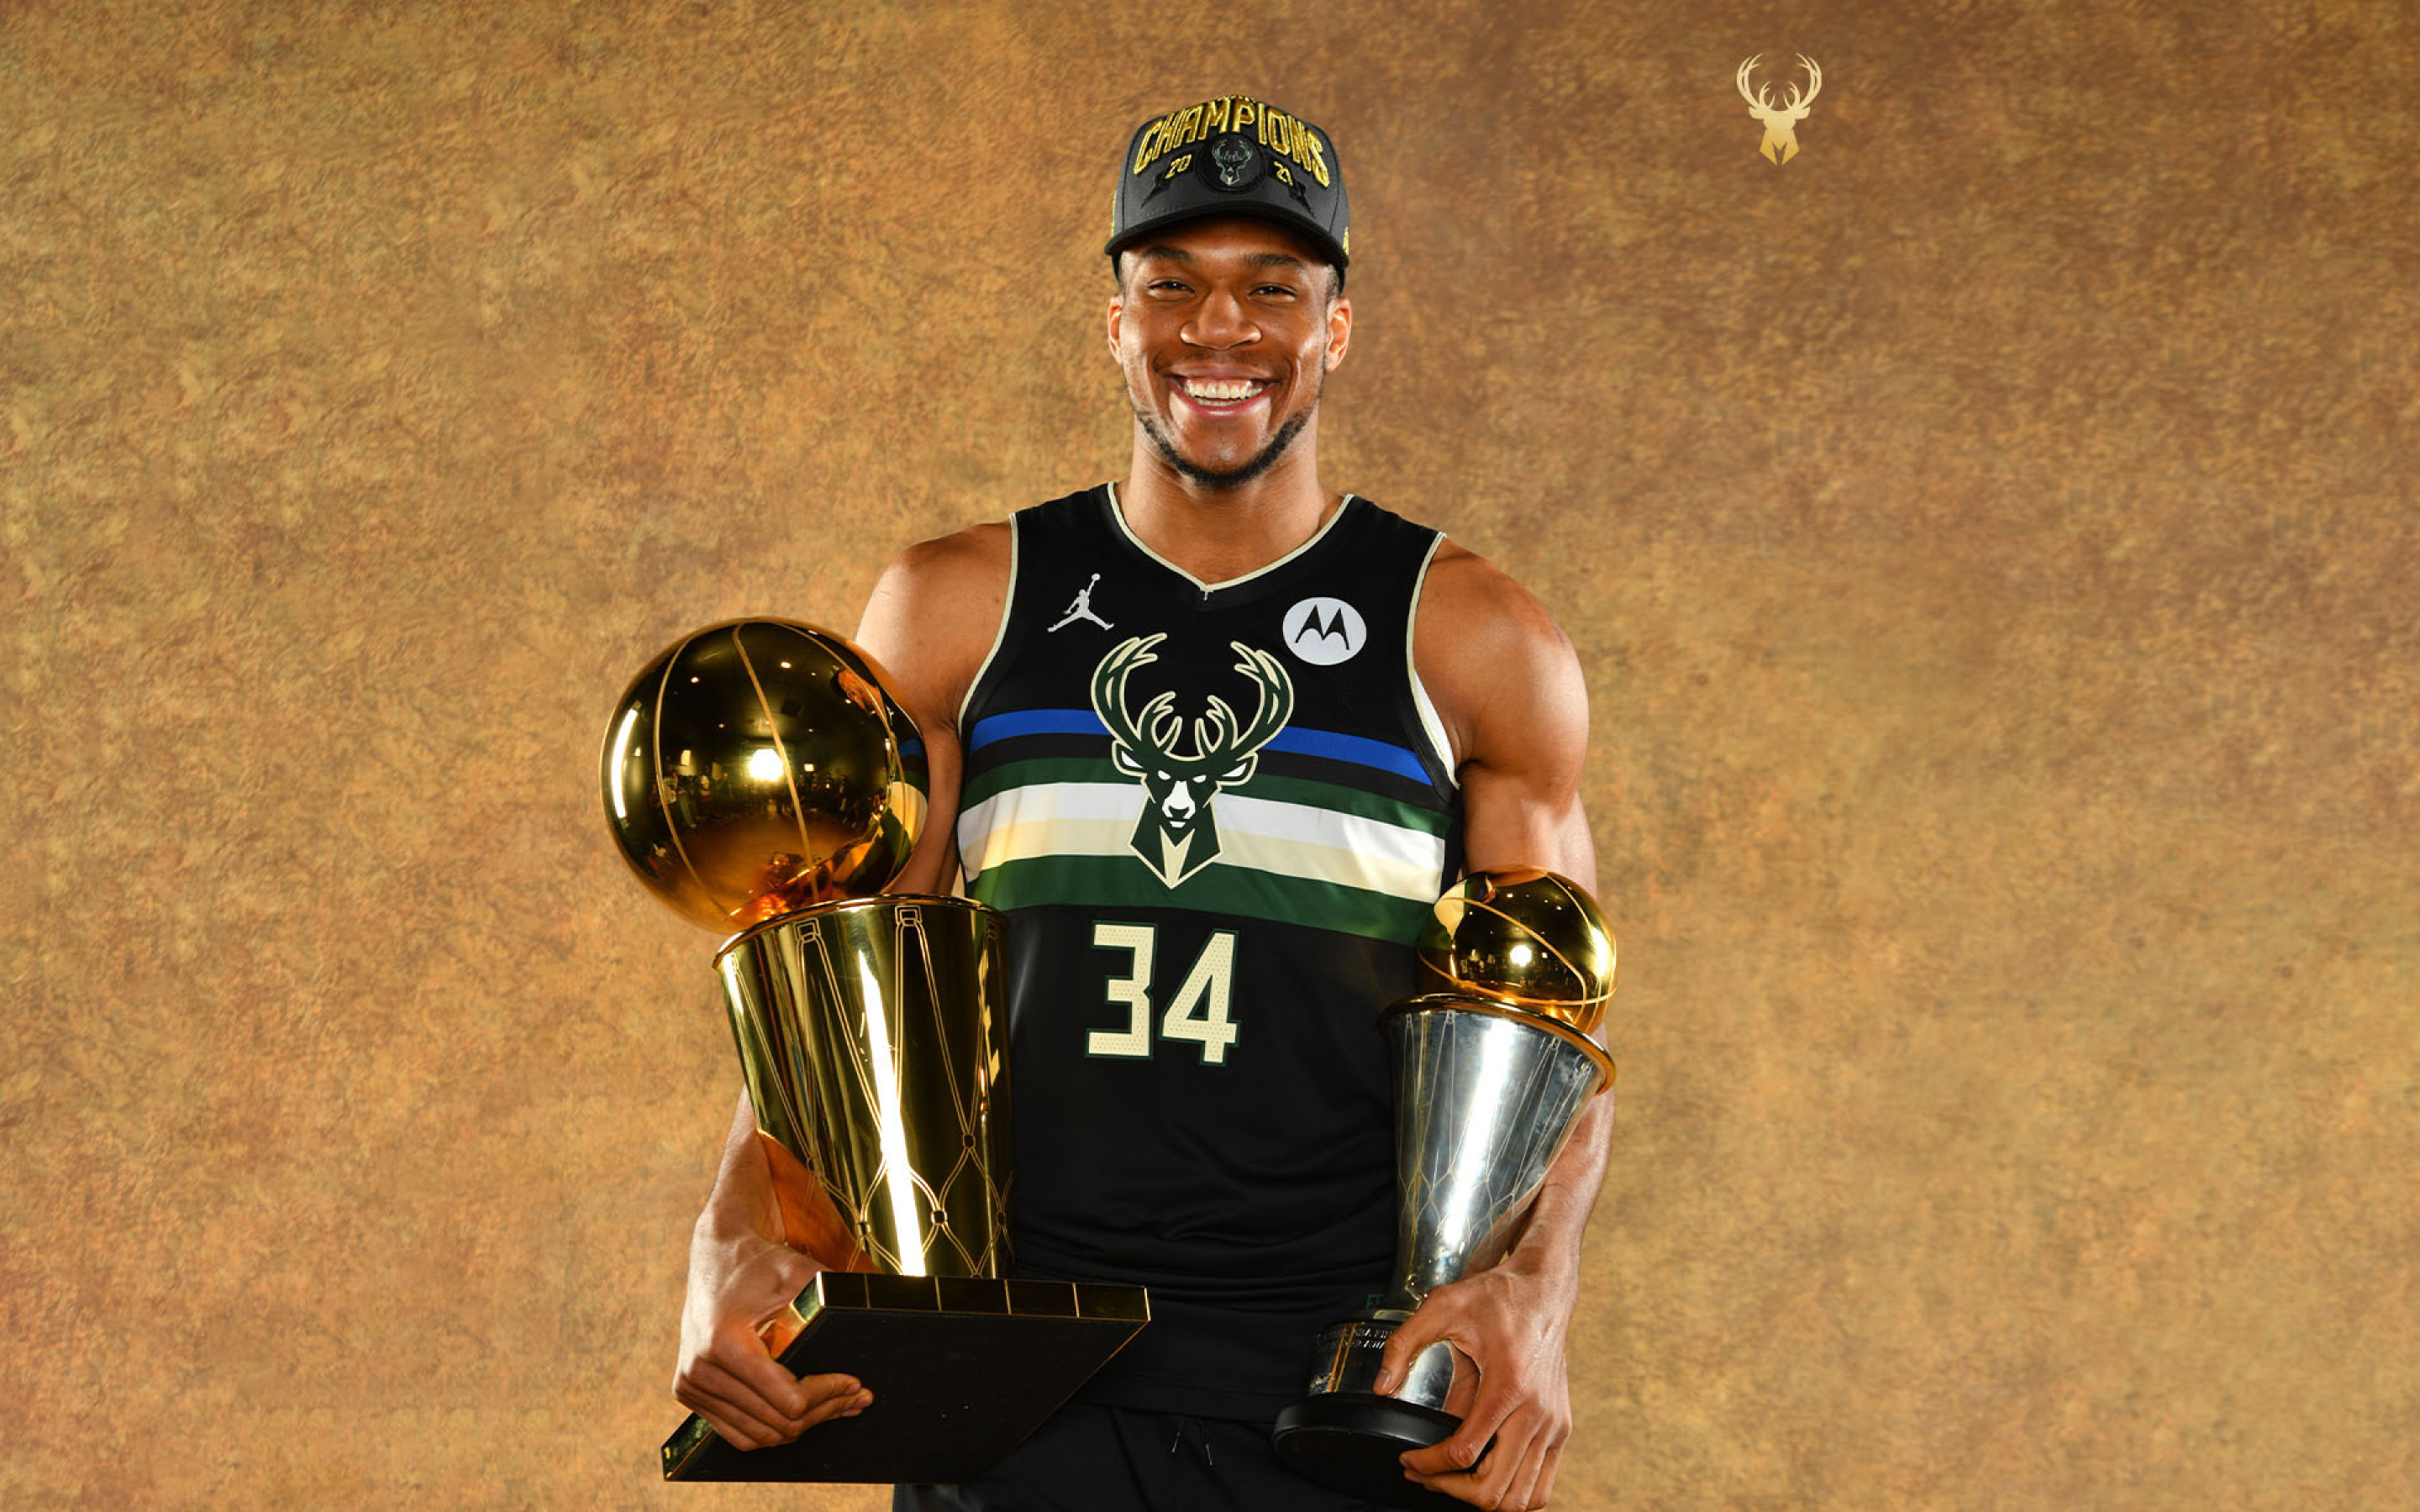 2880x1800 Giannis Antetokounmpo NBA Champion Macbook Pro Retina Wallpaper,  HD Sports 4K Wallpapers, Images, Photos and Background - Wallpapers Den